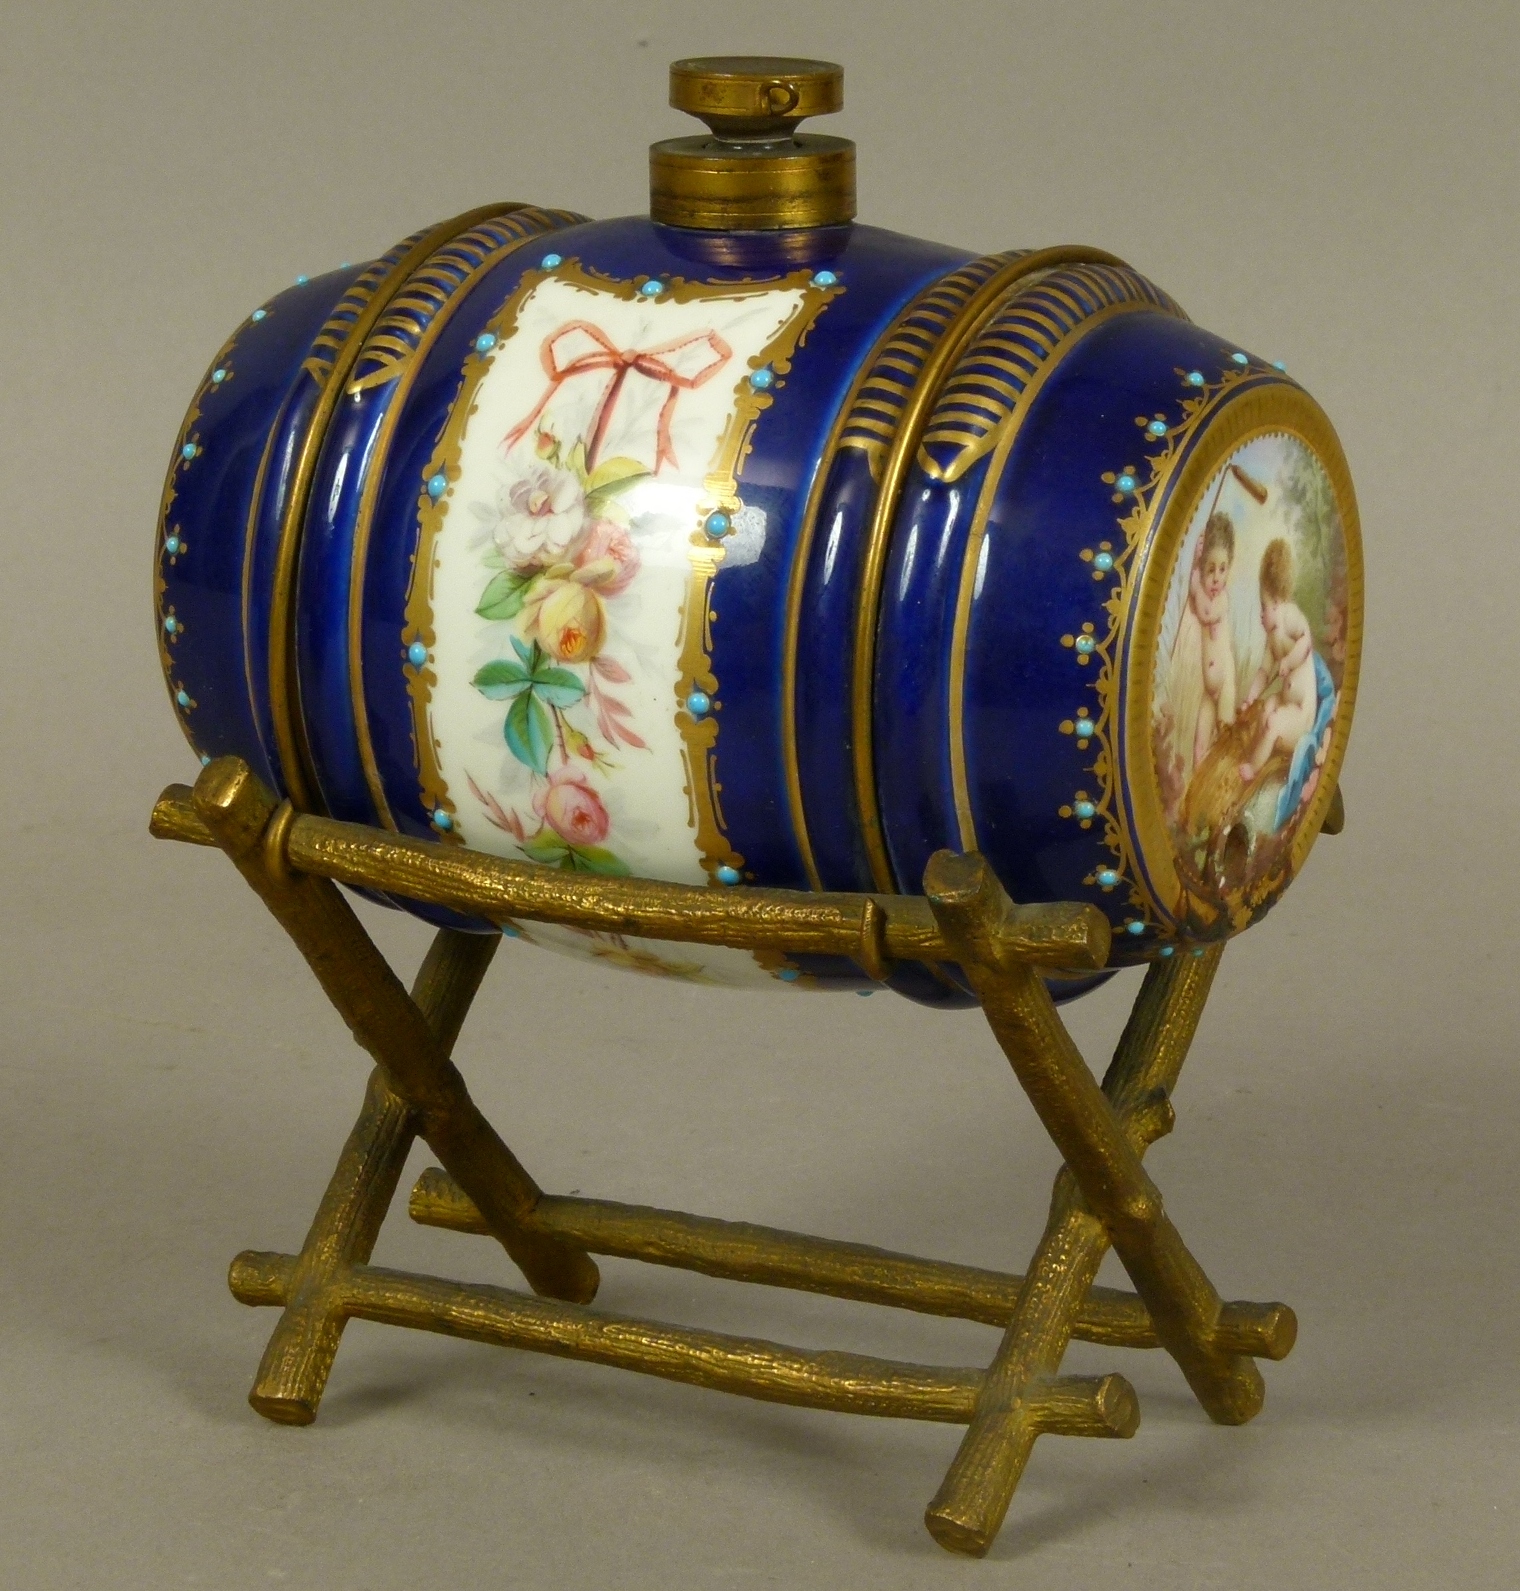 A LATE 19TH CENTURY FRENCH PORCELAIN AND GILT-BRONZE MOUNTED SPIRIT BARREL, the porcelain barrel - Image 2 of 5